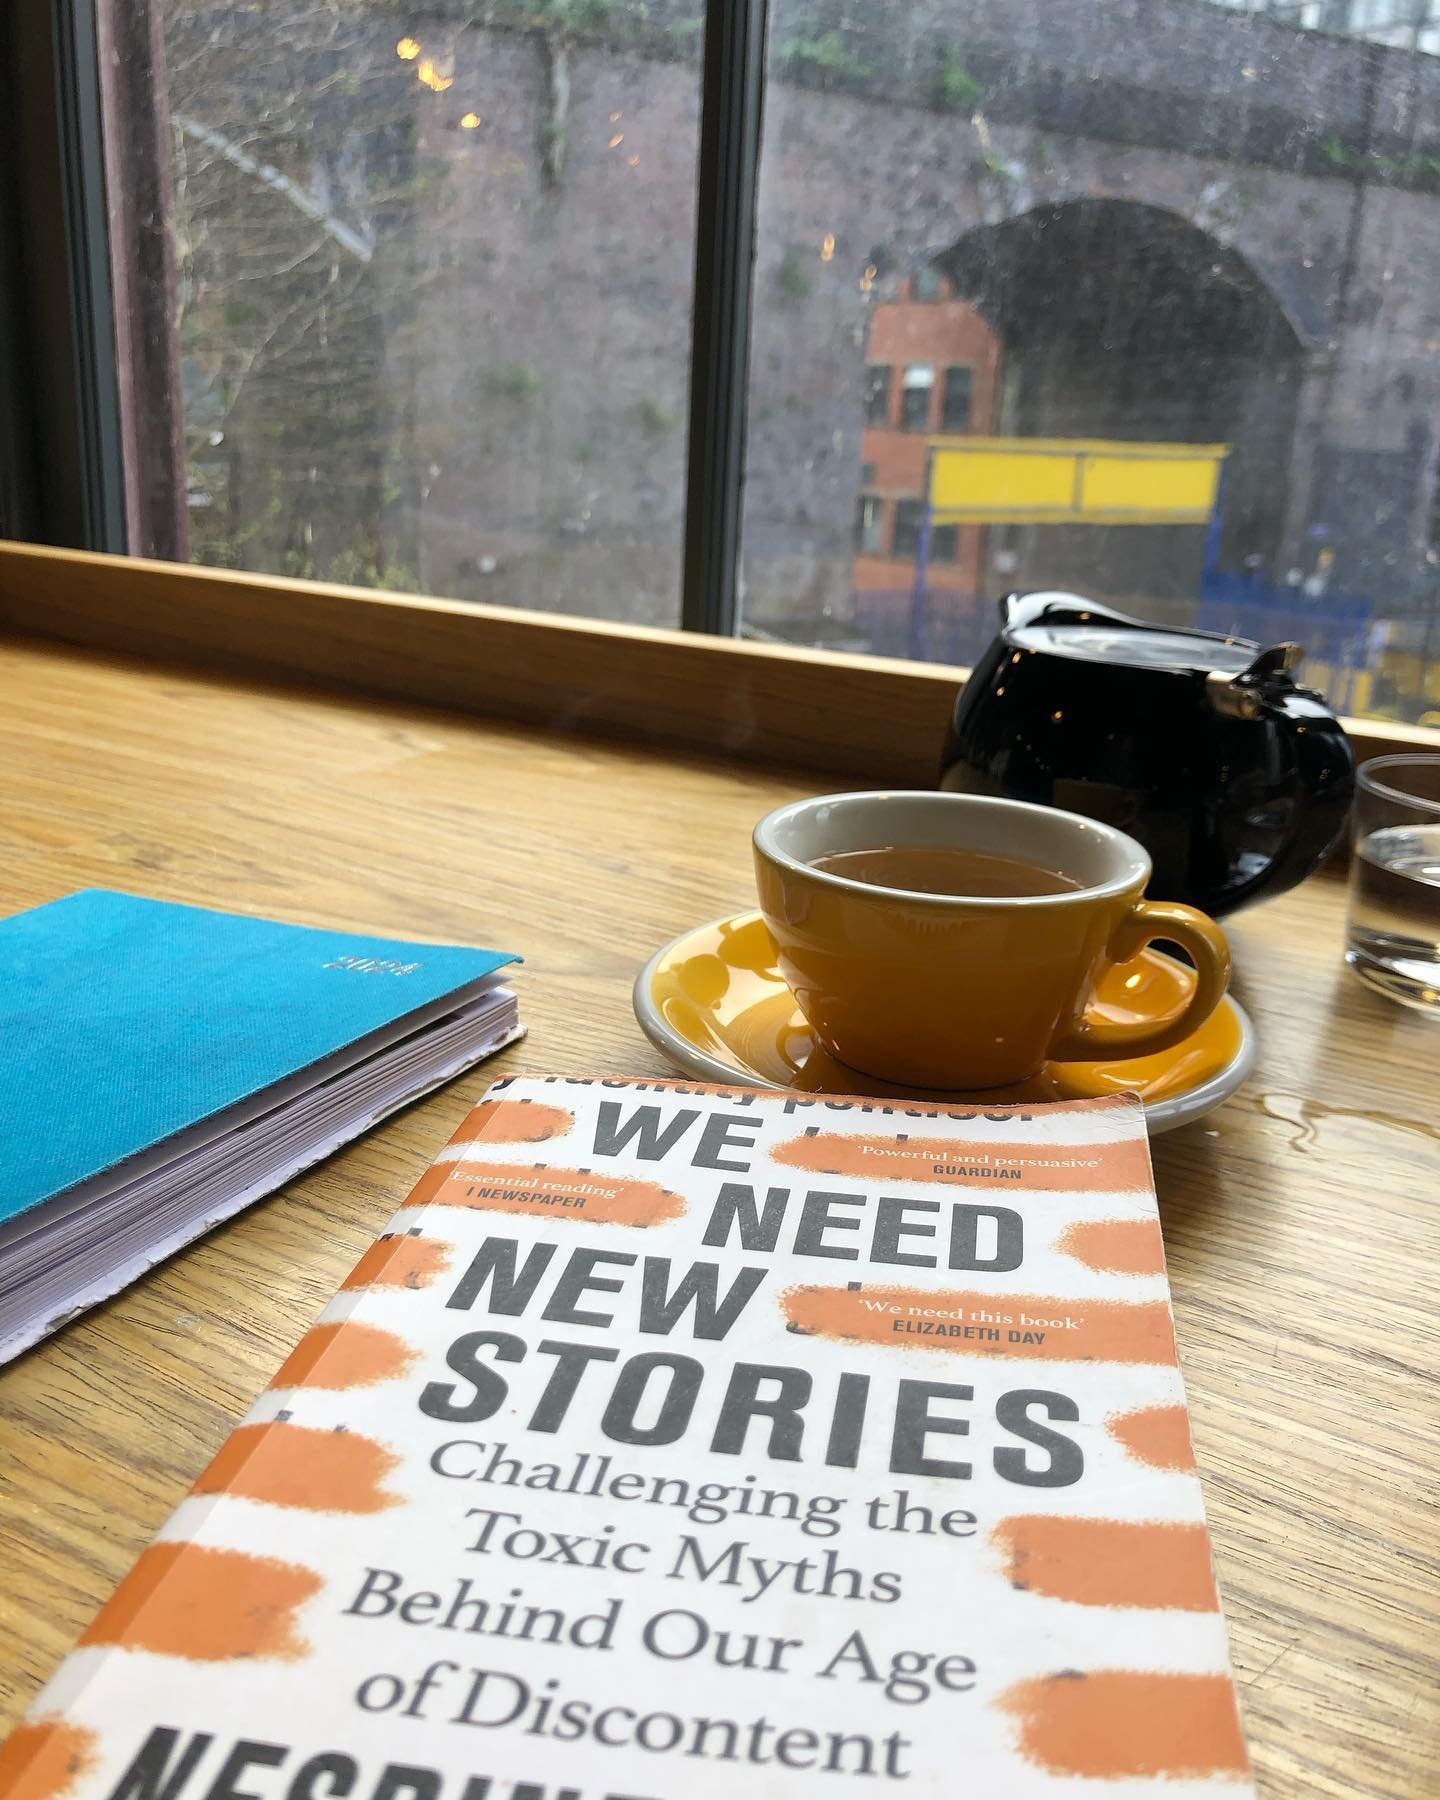 📙We need new stories - challenging the toxic myths behind our age of discontent by @nesrine_malik 

Can&rsquo;t wait to dive into this with @keri_l_jarvis study group 

Already it&rsquo;s juicy!

🗣️stories, myths and narratives we tell ourselves th